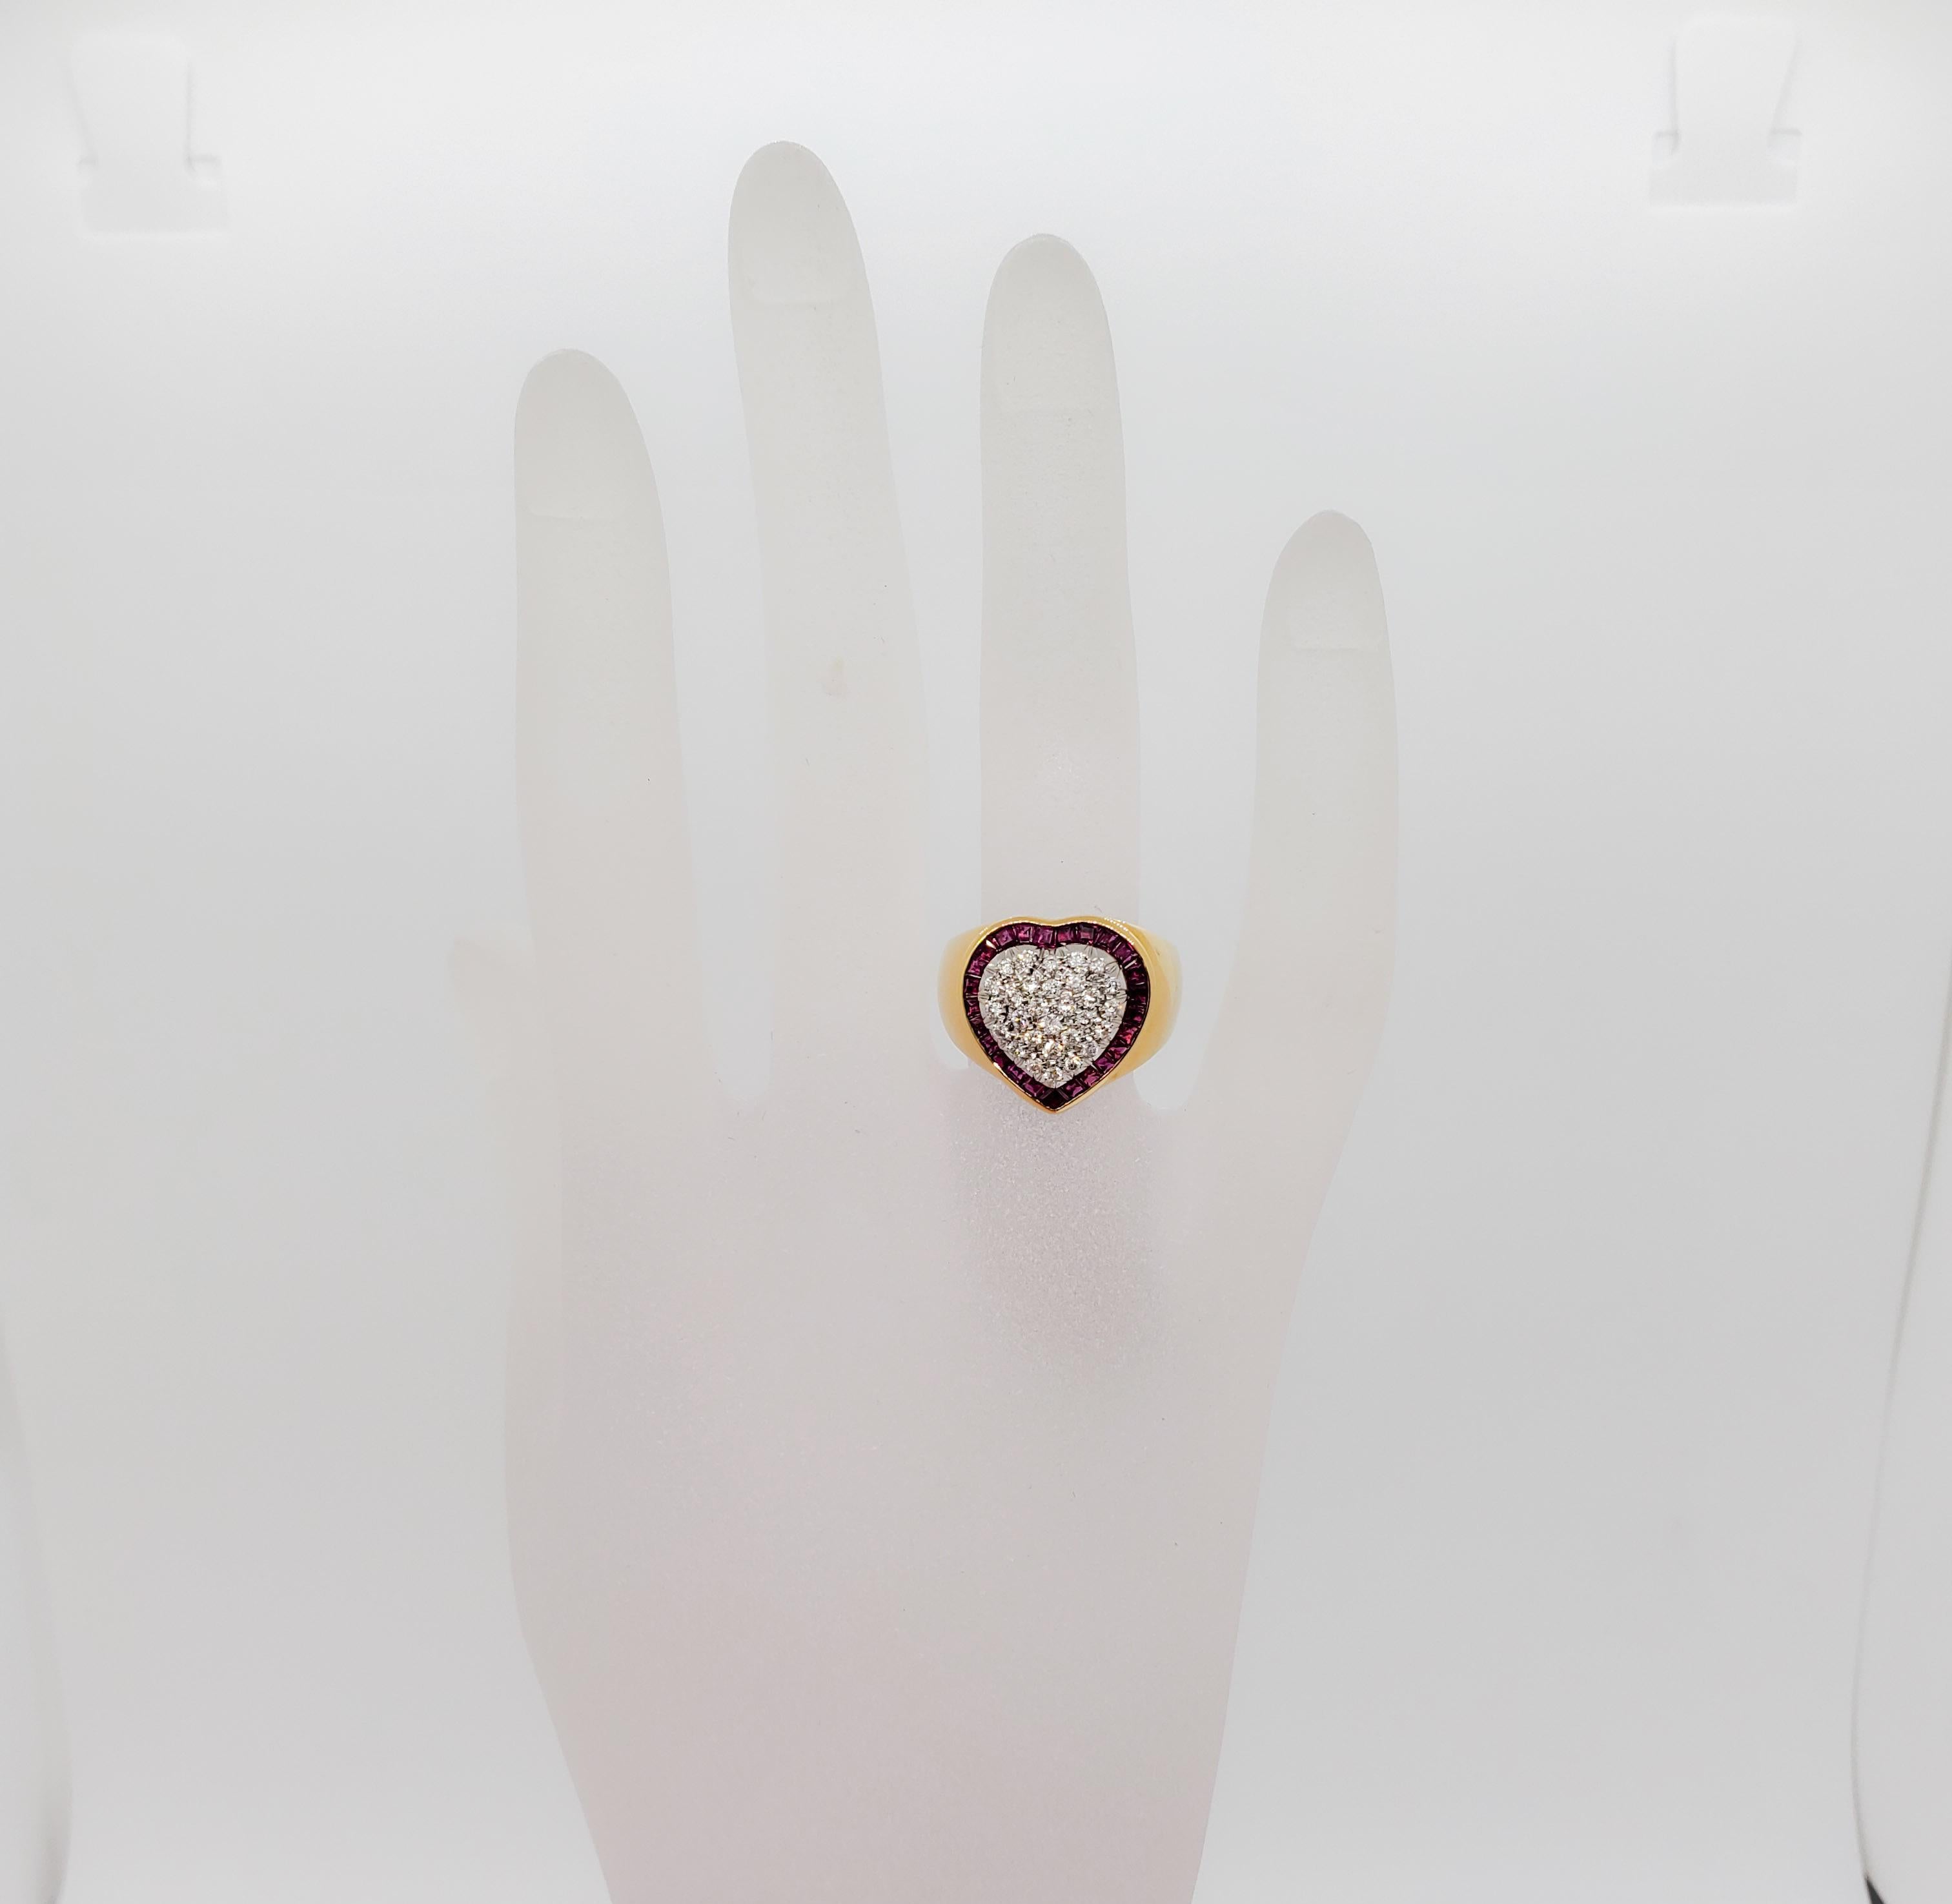 Beautiful estate ring in the shape of a heart. This ring has 1.20 ct. of good quality, white, and bright diamond rounds in pave as well as 0.41 ct. of bright red ruby squares. A very unique display in a classic heart shape. Handmade in 18k yellow